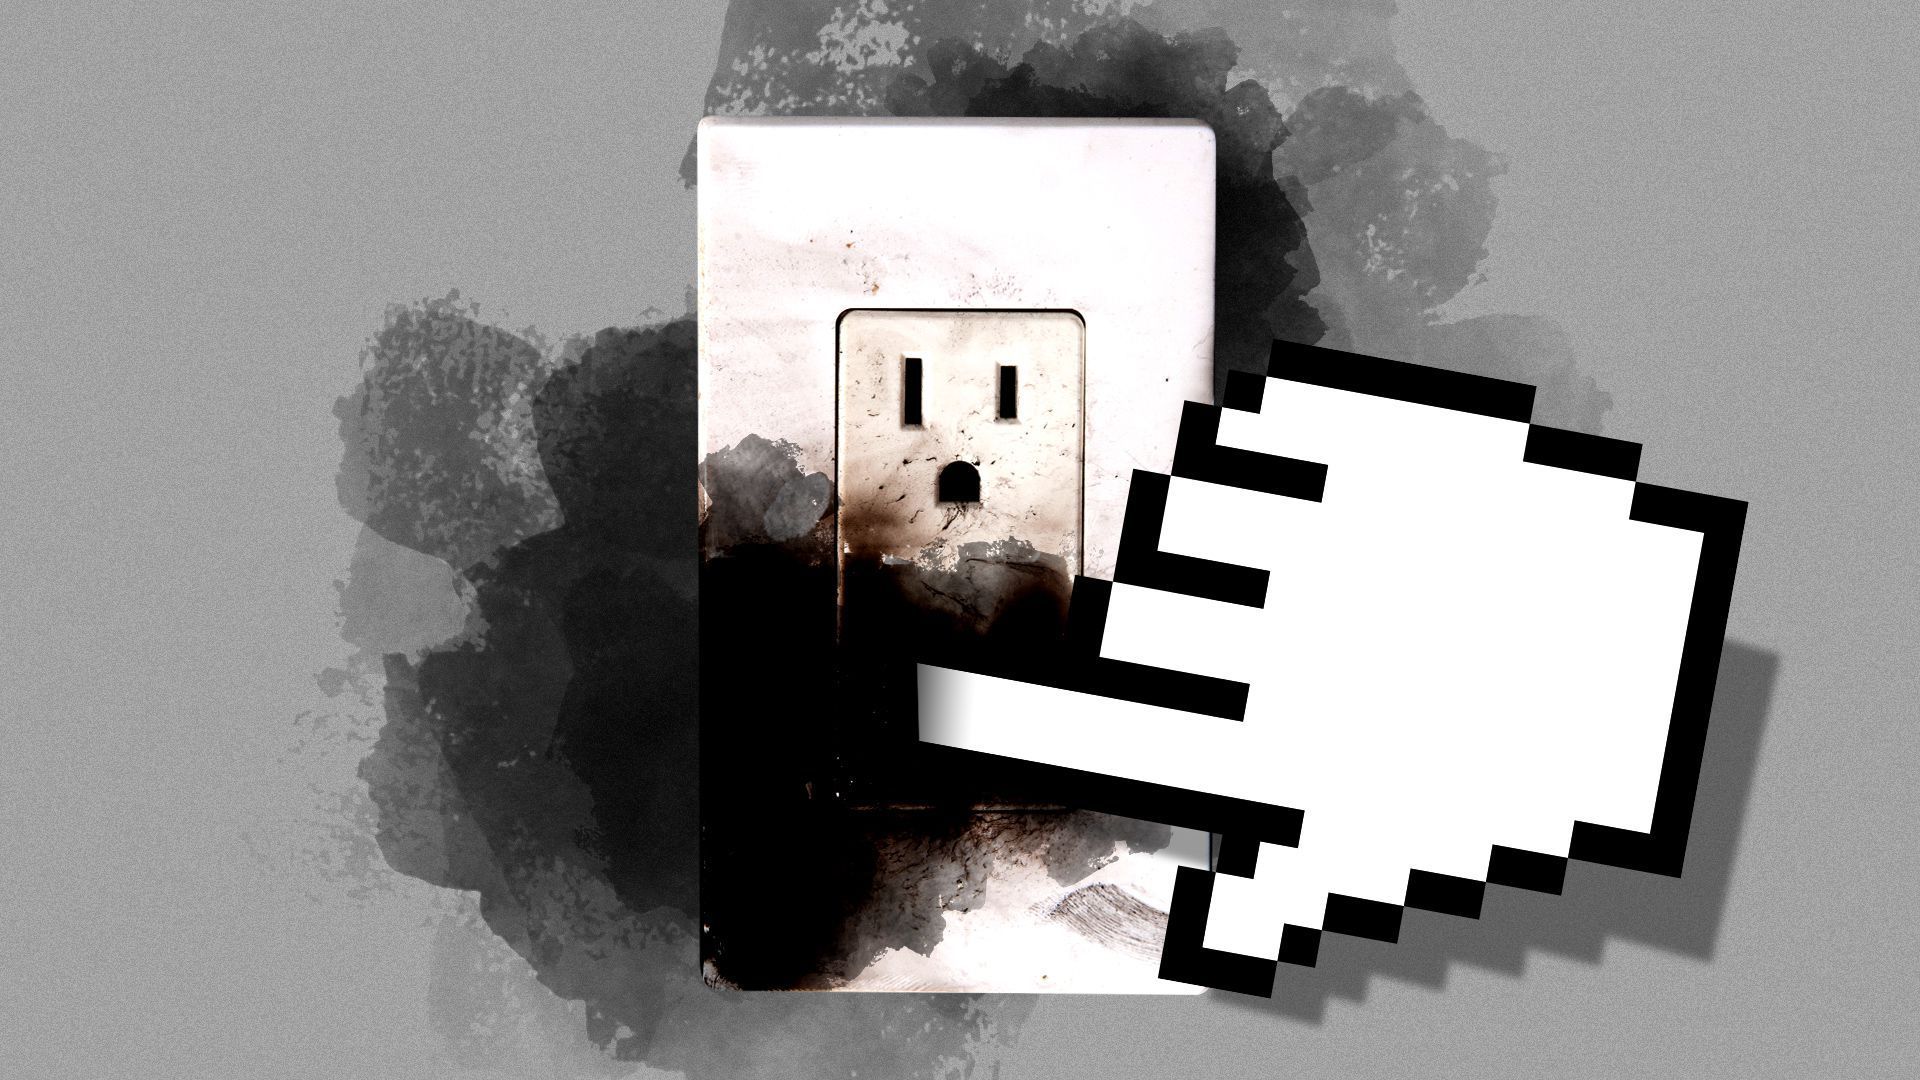 Illustration of a computer cursor on an electrical outlet.